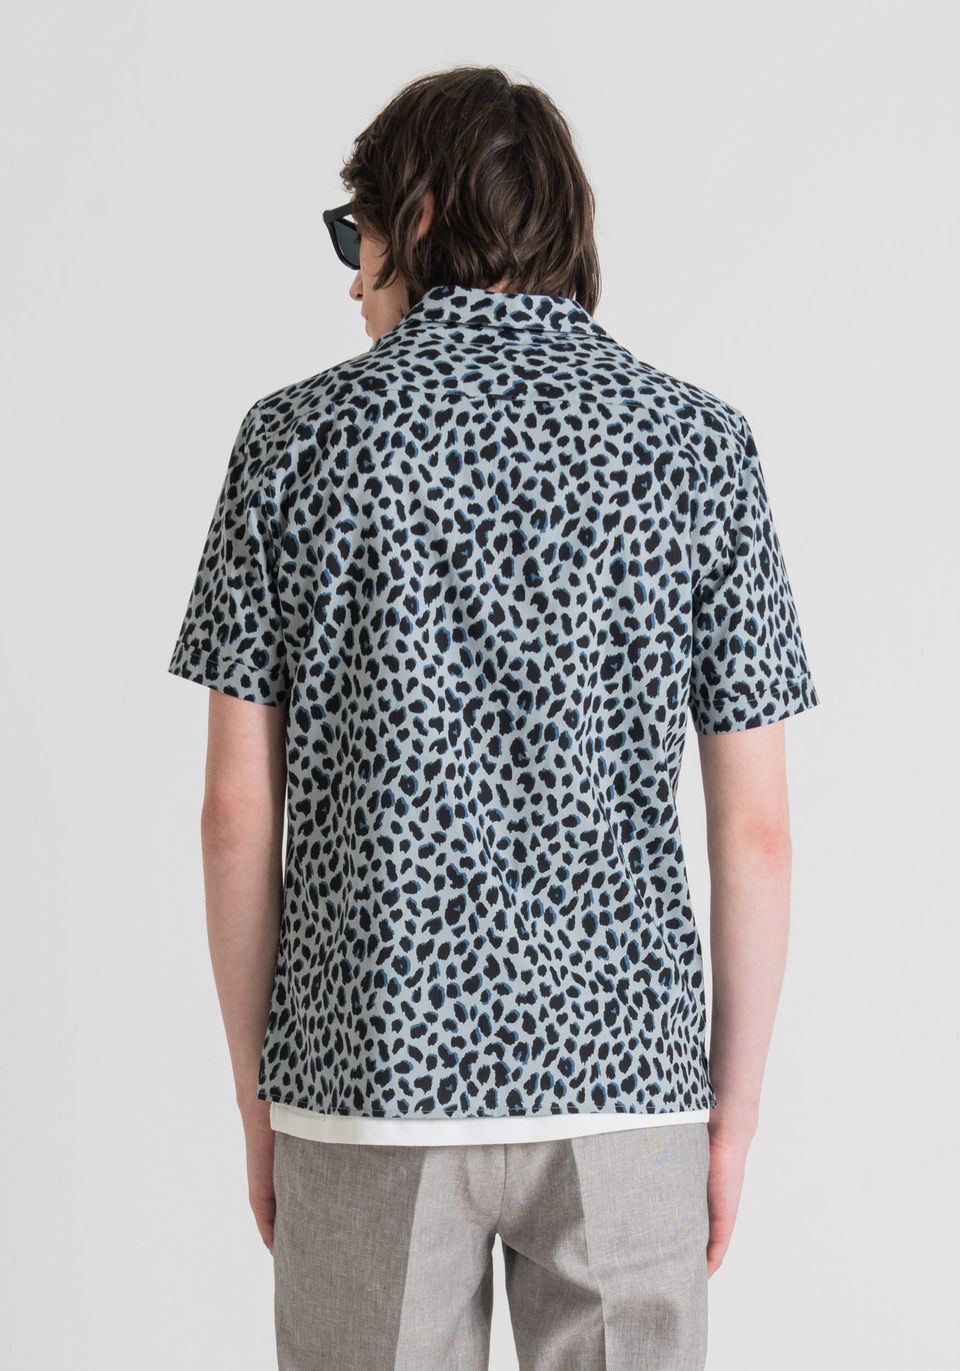 REGULAR-FIT SHIRT IN COTTON-AND-VISCOSE POPLIN WITH AN ALL-OVER DAPPLED PRINT - Antony Morato Online Shop